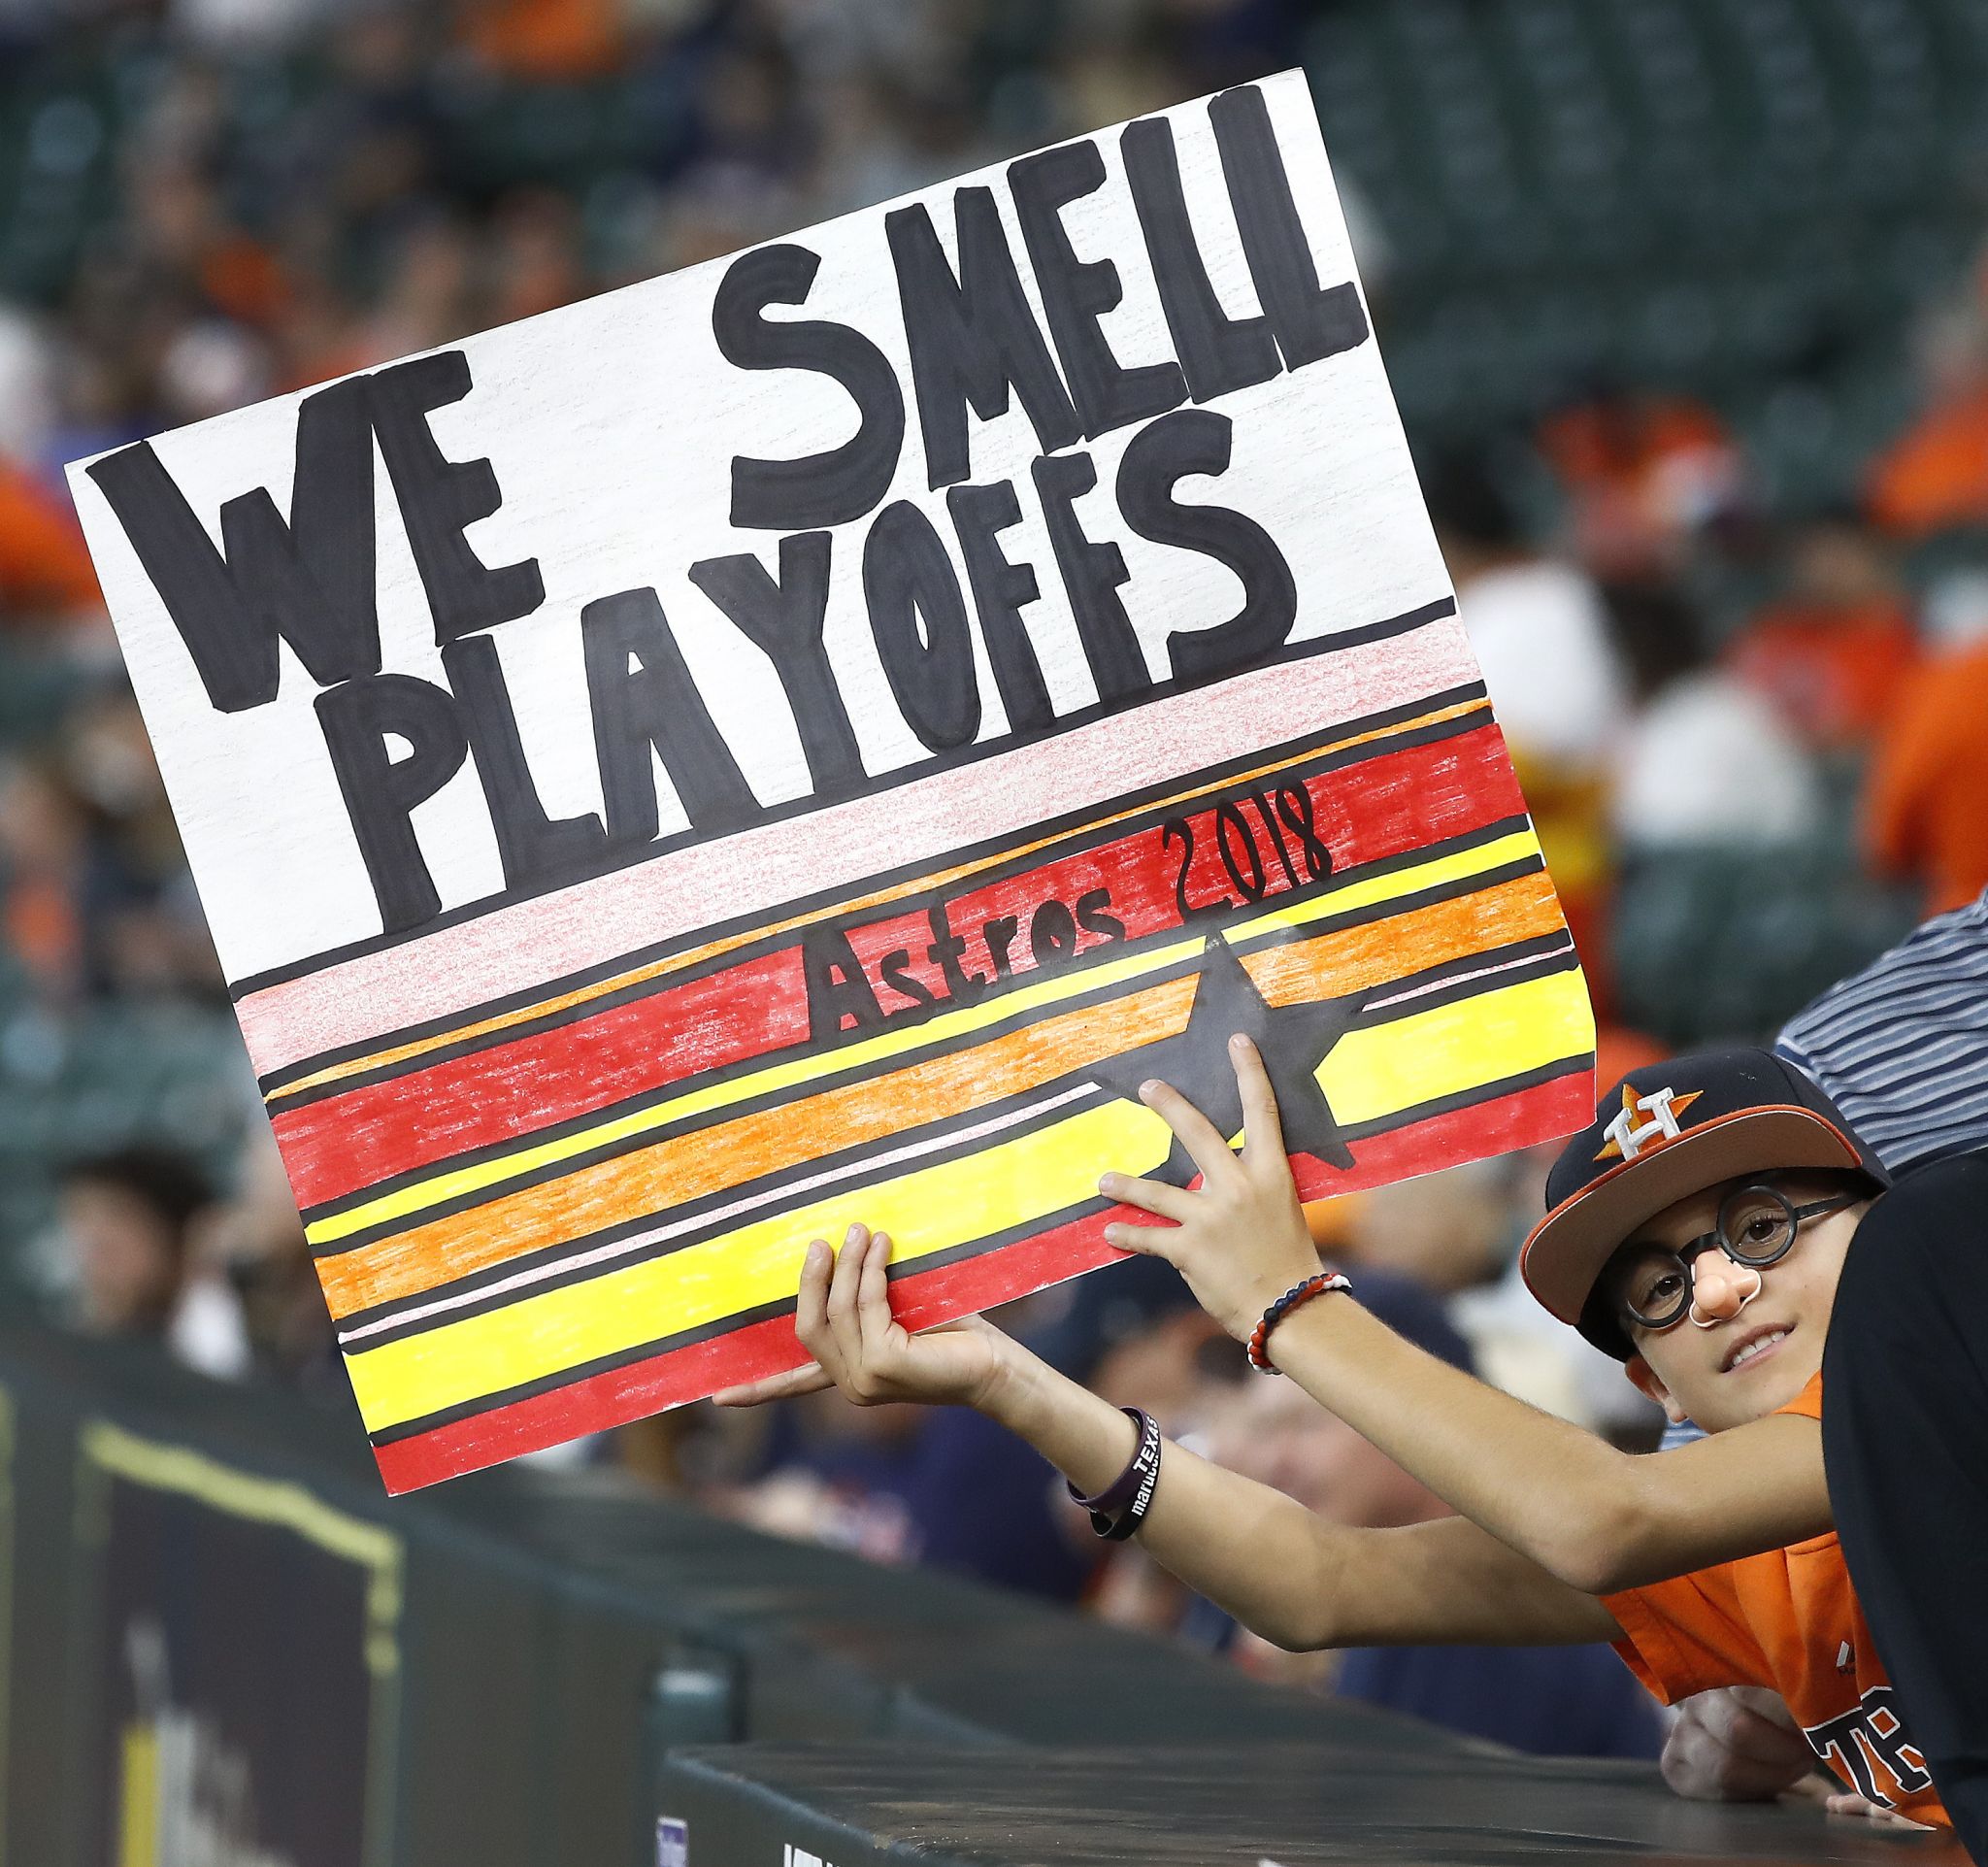 Astros playoff tickets go on sale Friday morning